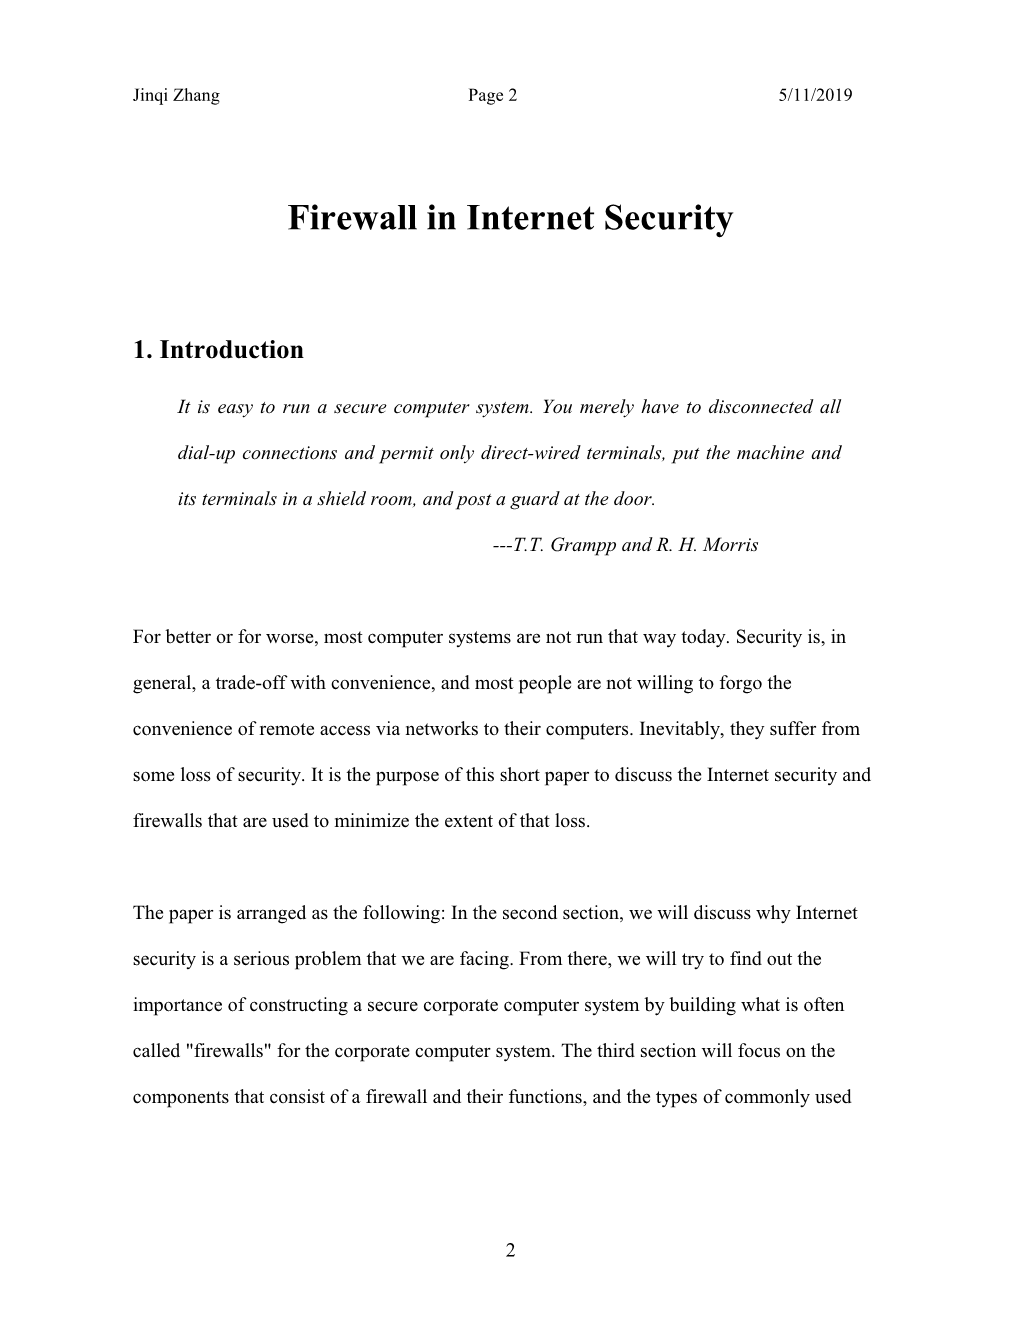 Firewall and Internet Security